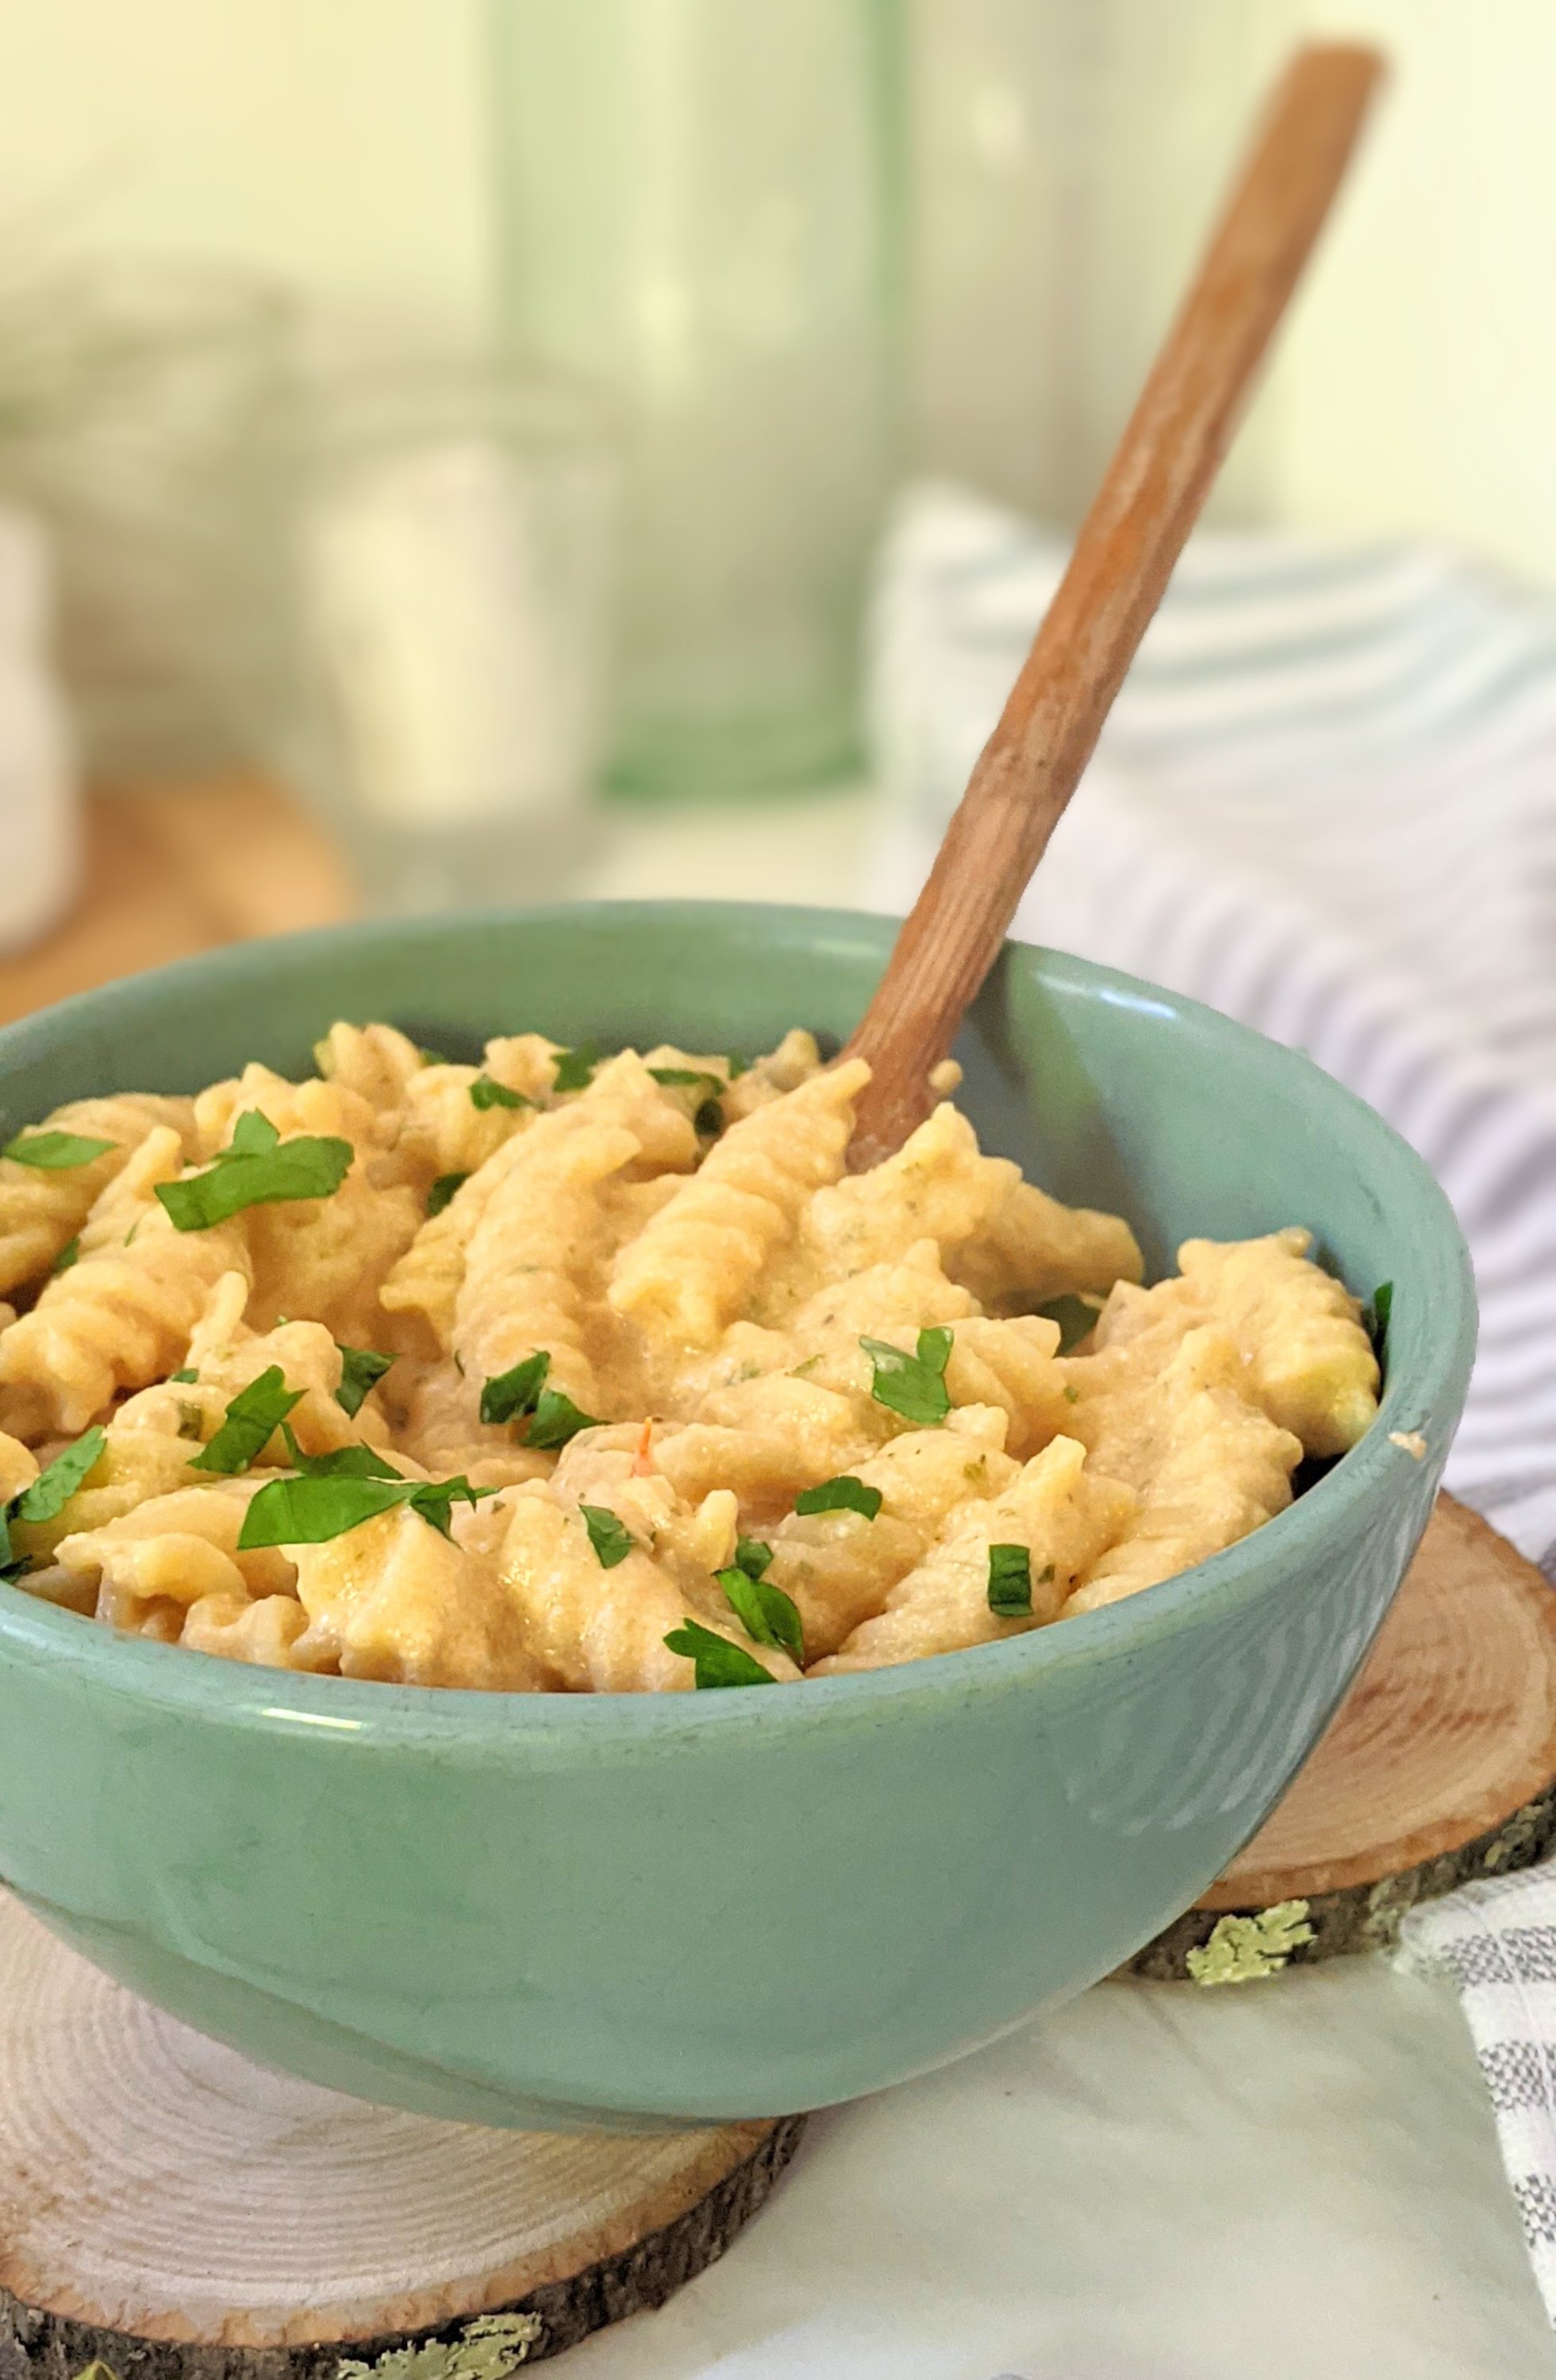 vegan tofu mac and cheese recipe high protein dairy free mac and cheese with tofu recipe silken tofu pasta recipe healthy pasta high protein vegan noodles